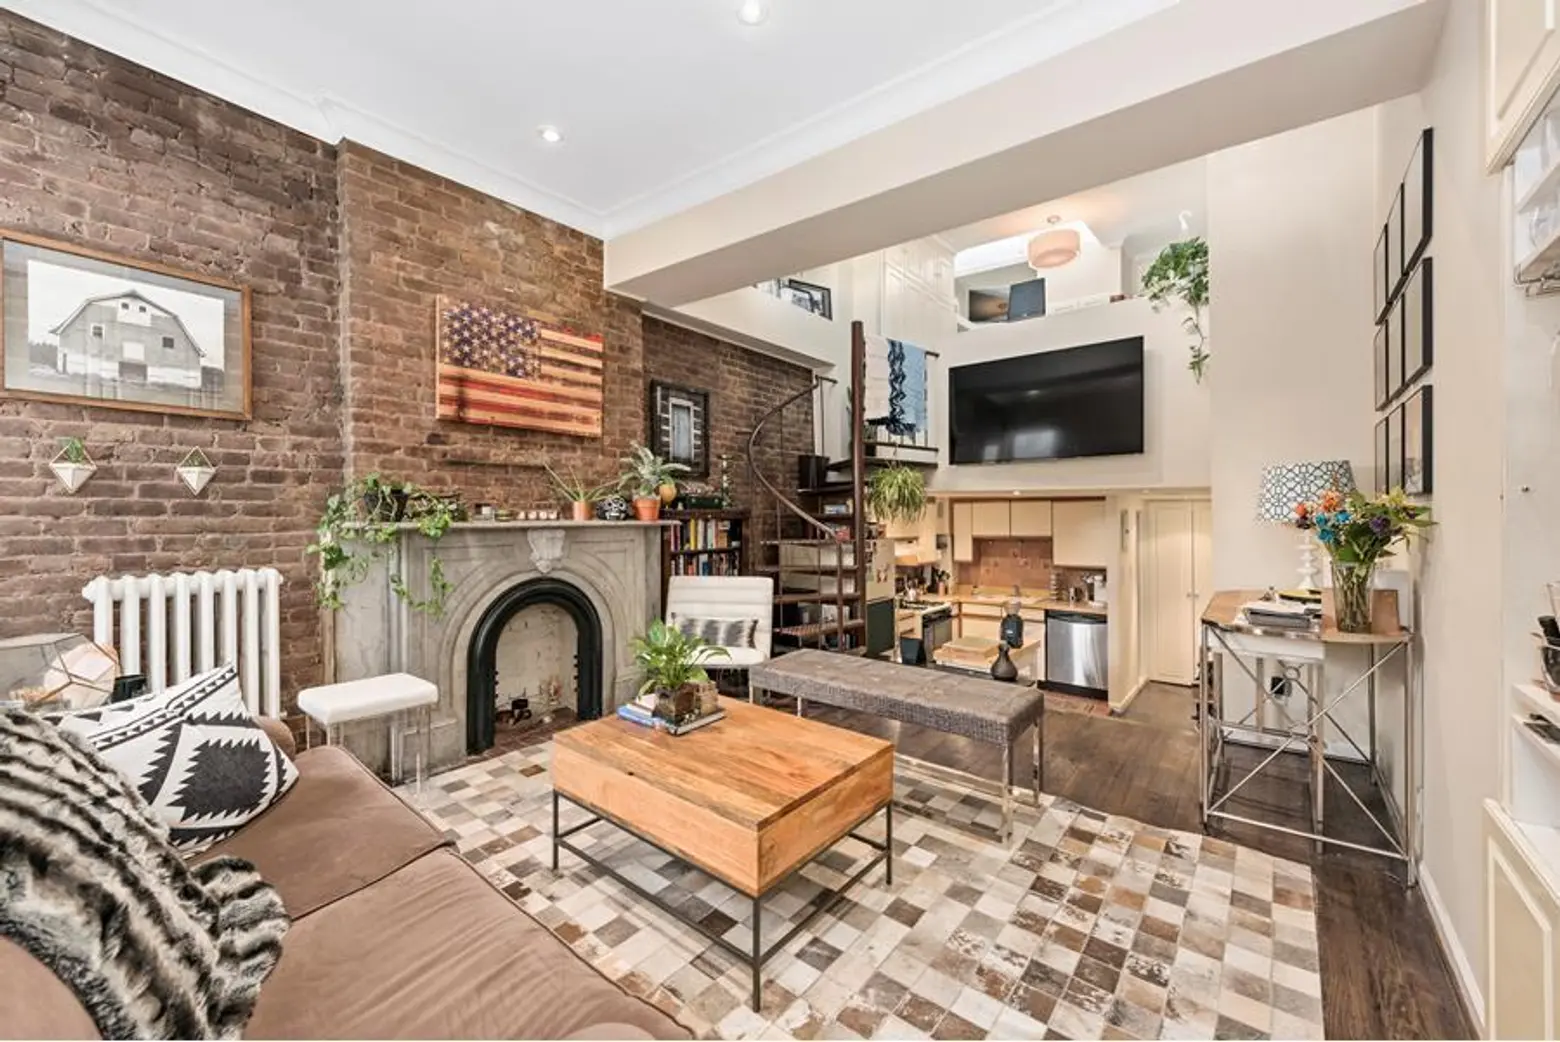 For $825K, this Hell’s Kitchen duplex is as efficient as it is charming